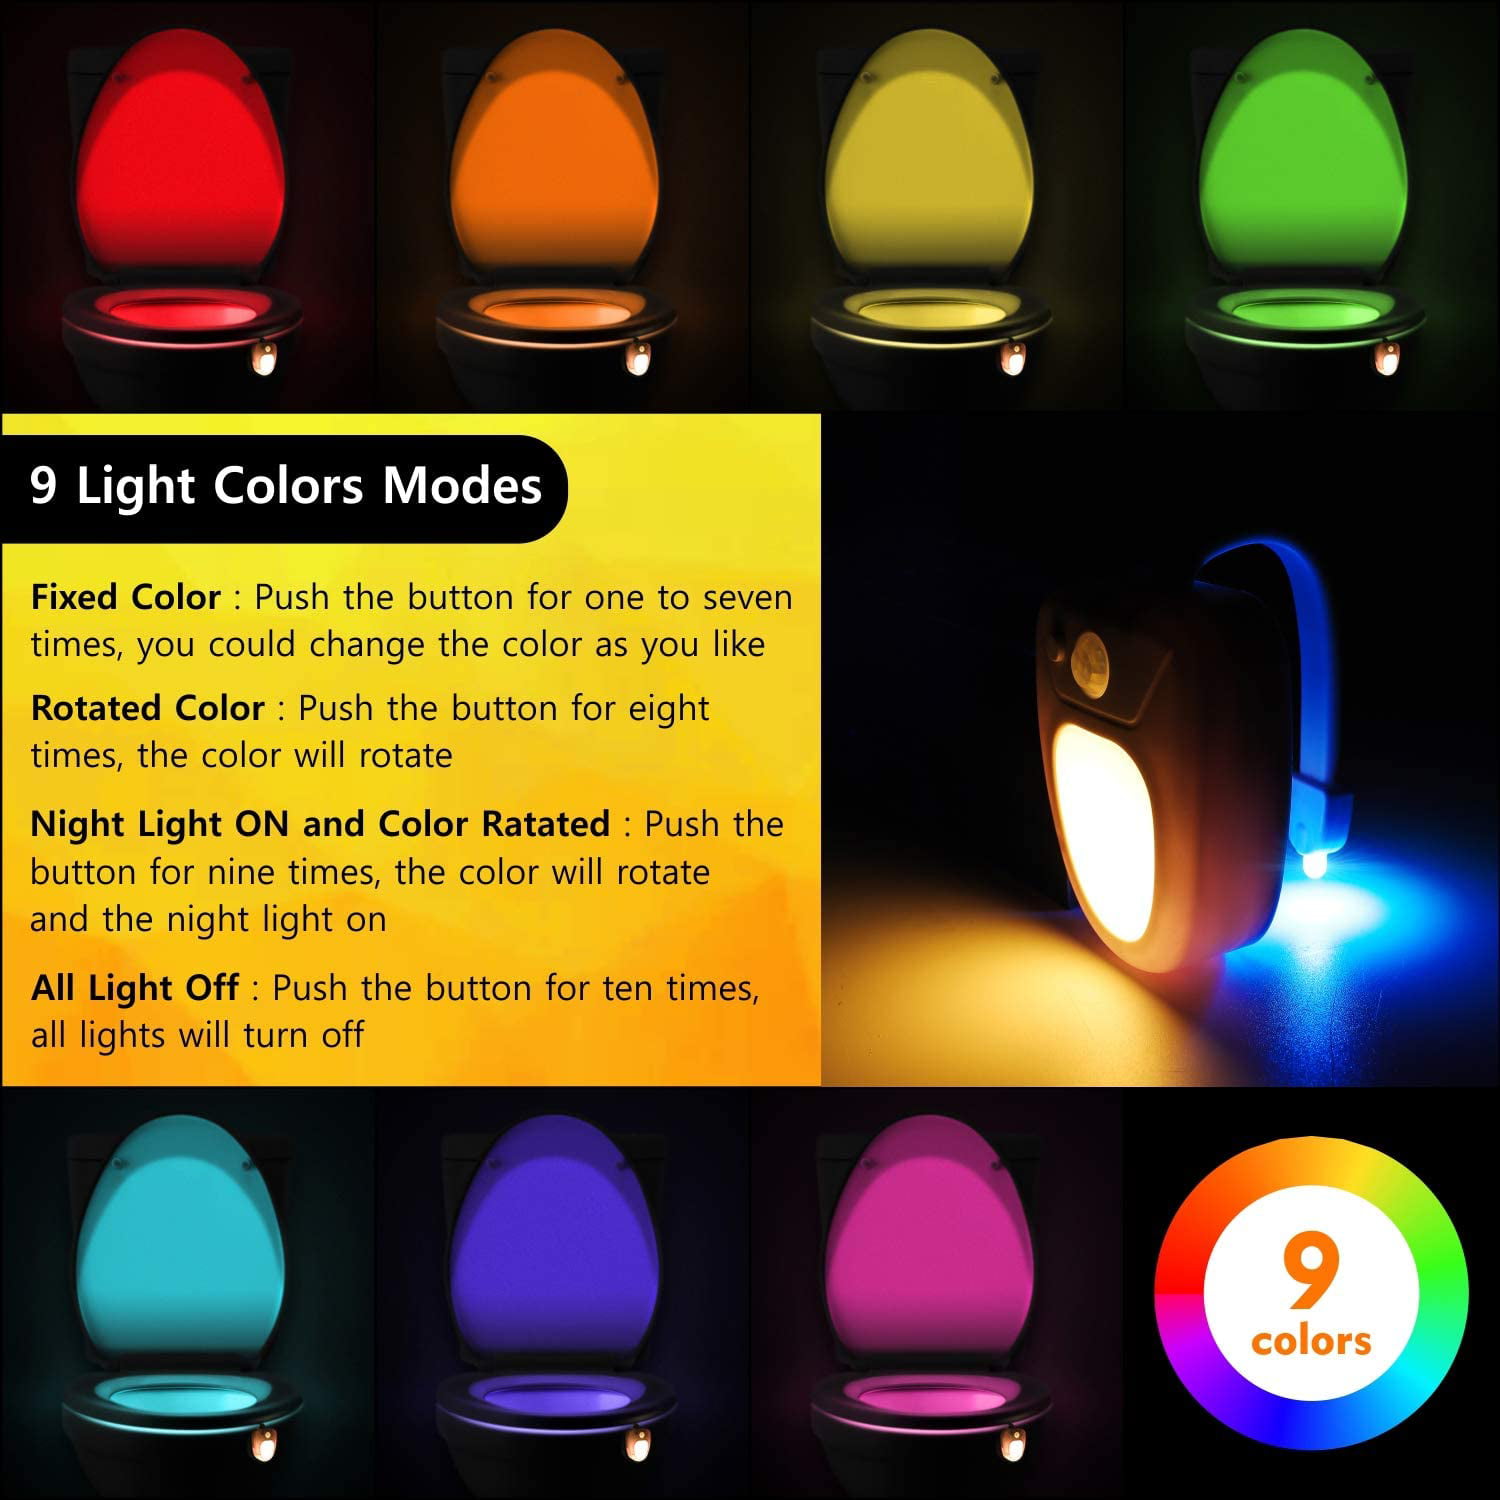 2 Pack Toilet Night Lights, 16-Color Changing LED Bowl Nightlight with  Motion Sensor Activated Detec…See more 2 Pack Toilet Night Lights, 16-Color